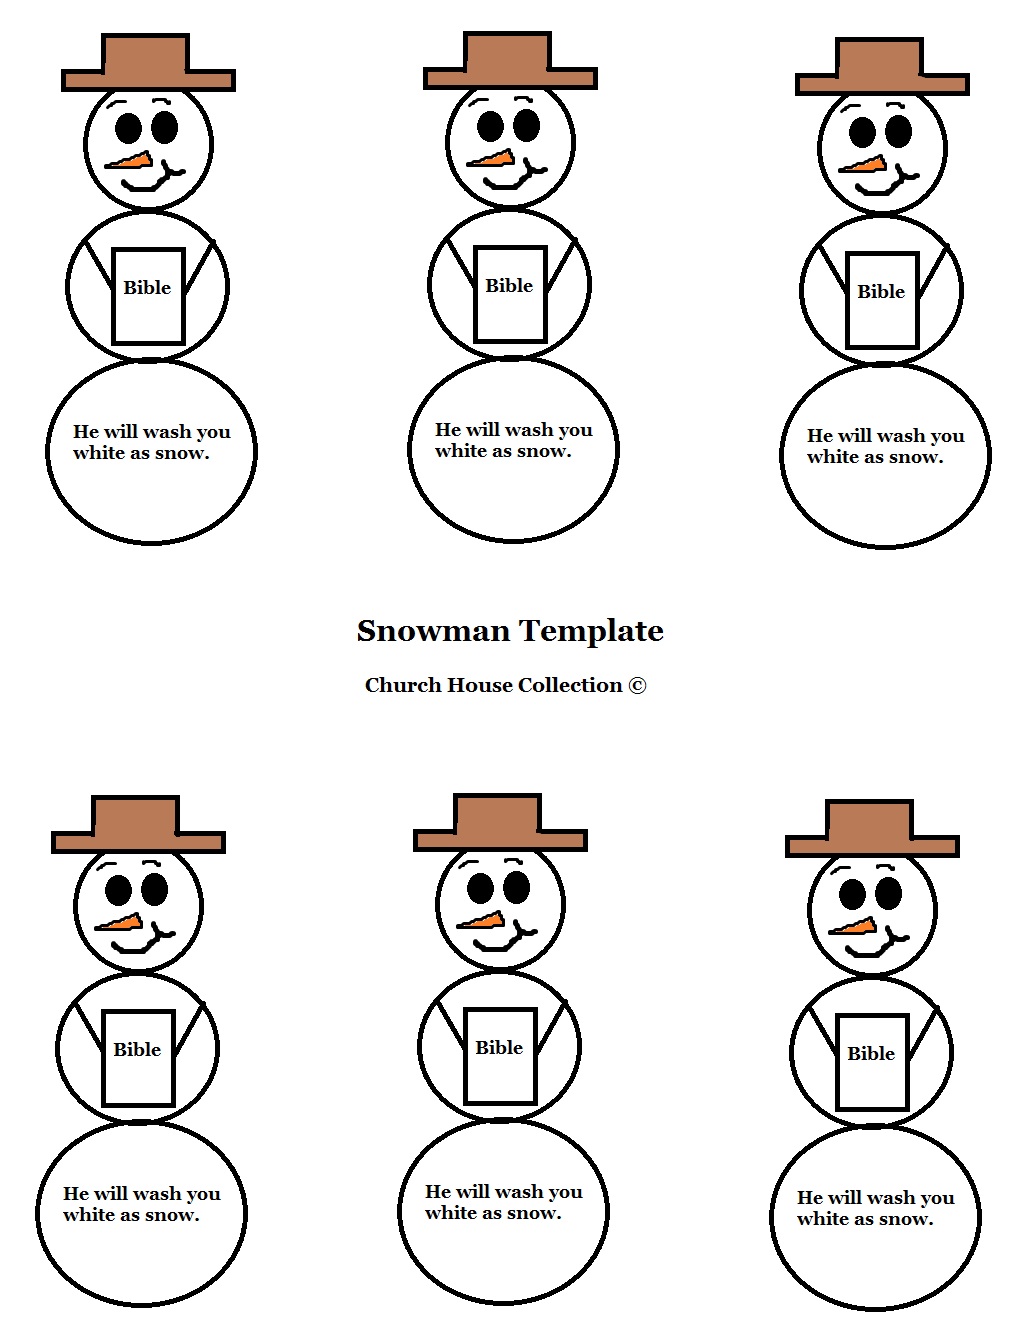 Free Christmas Snowman Holding A Bible "He Will Wash You White As Snow" printable Template Cutout for Kids in Sunday School by Church House Collection